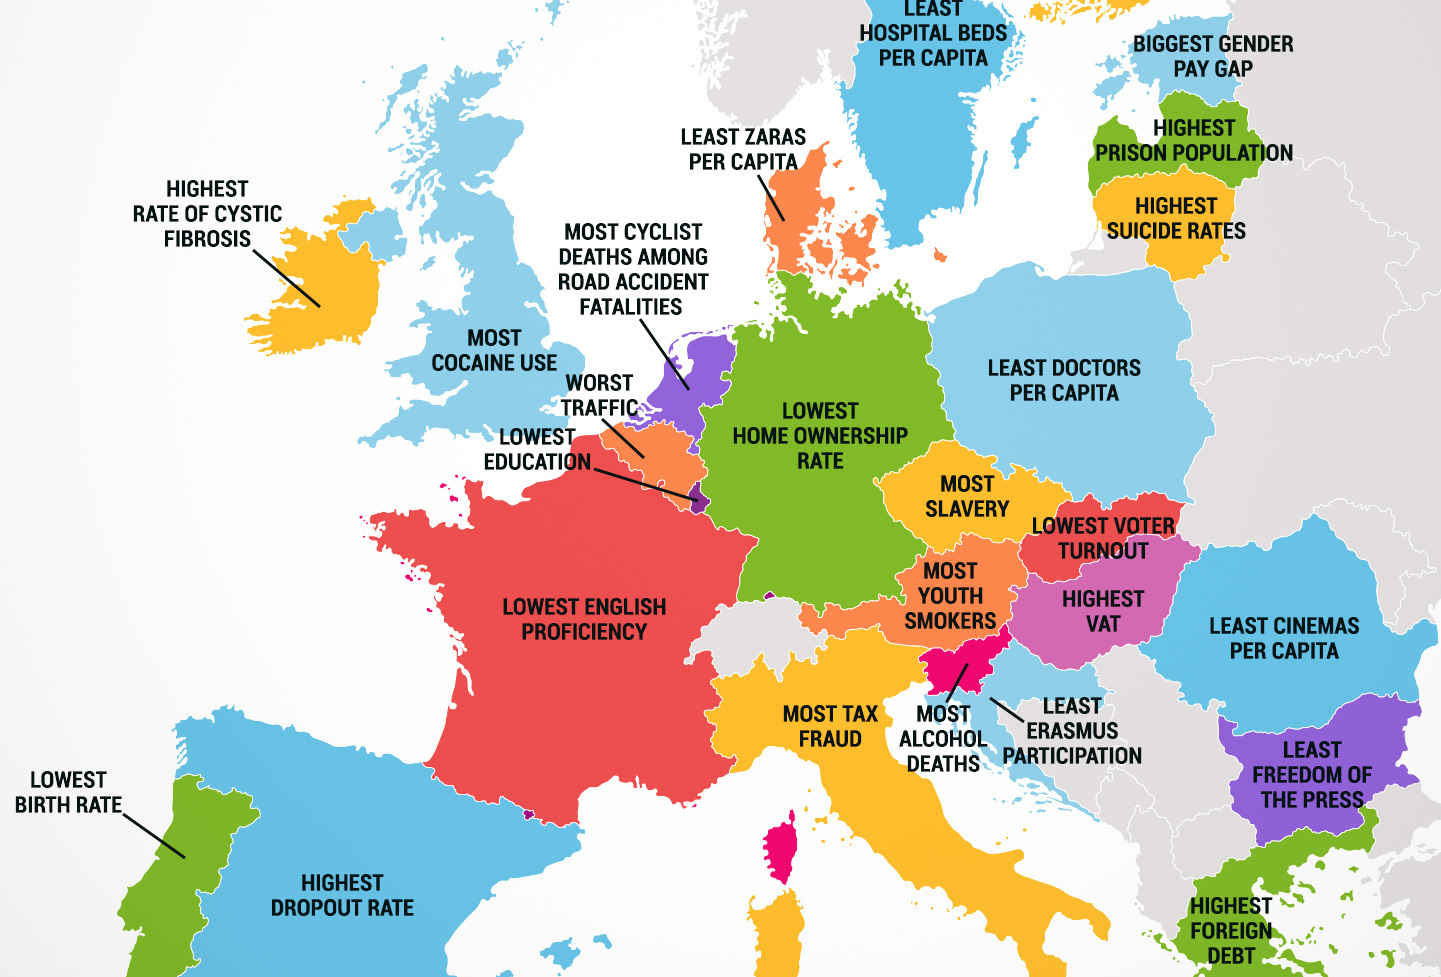 WHAT EVERY EUROPEAN COUNTRY IS THE WORST AT | jobfinder - Work and